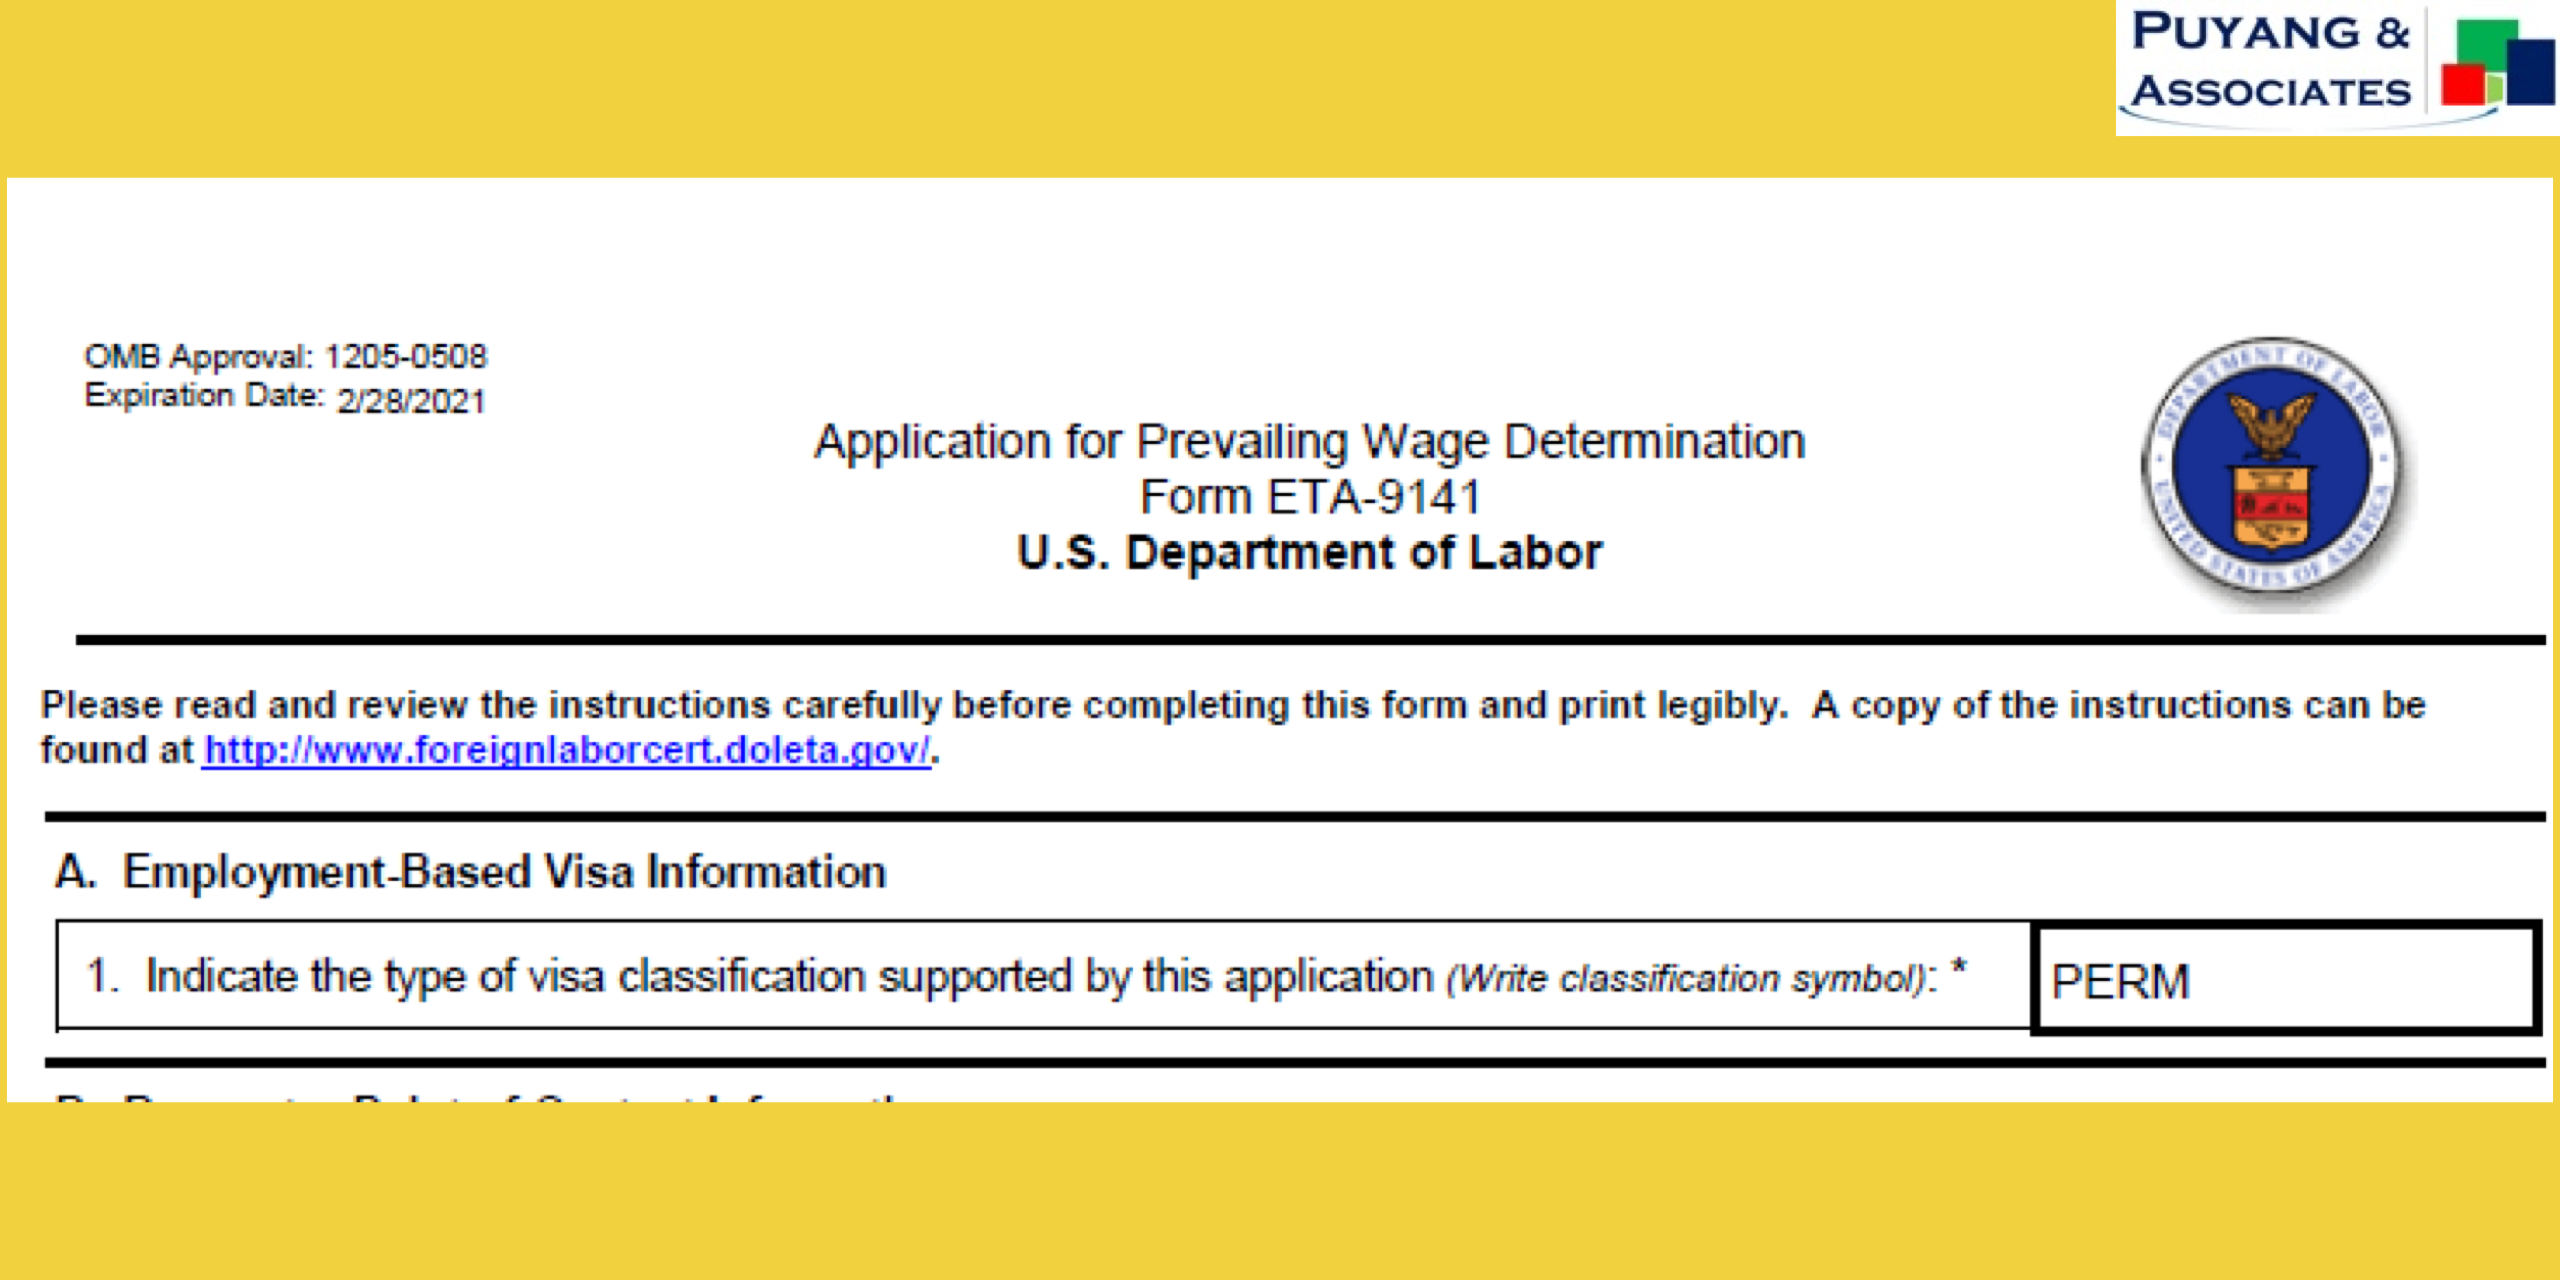 New Prevailing Wage Request Form and Other Updates from DOL